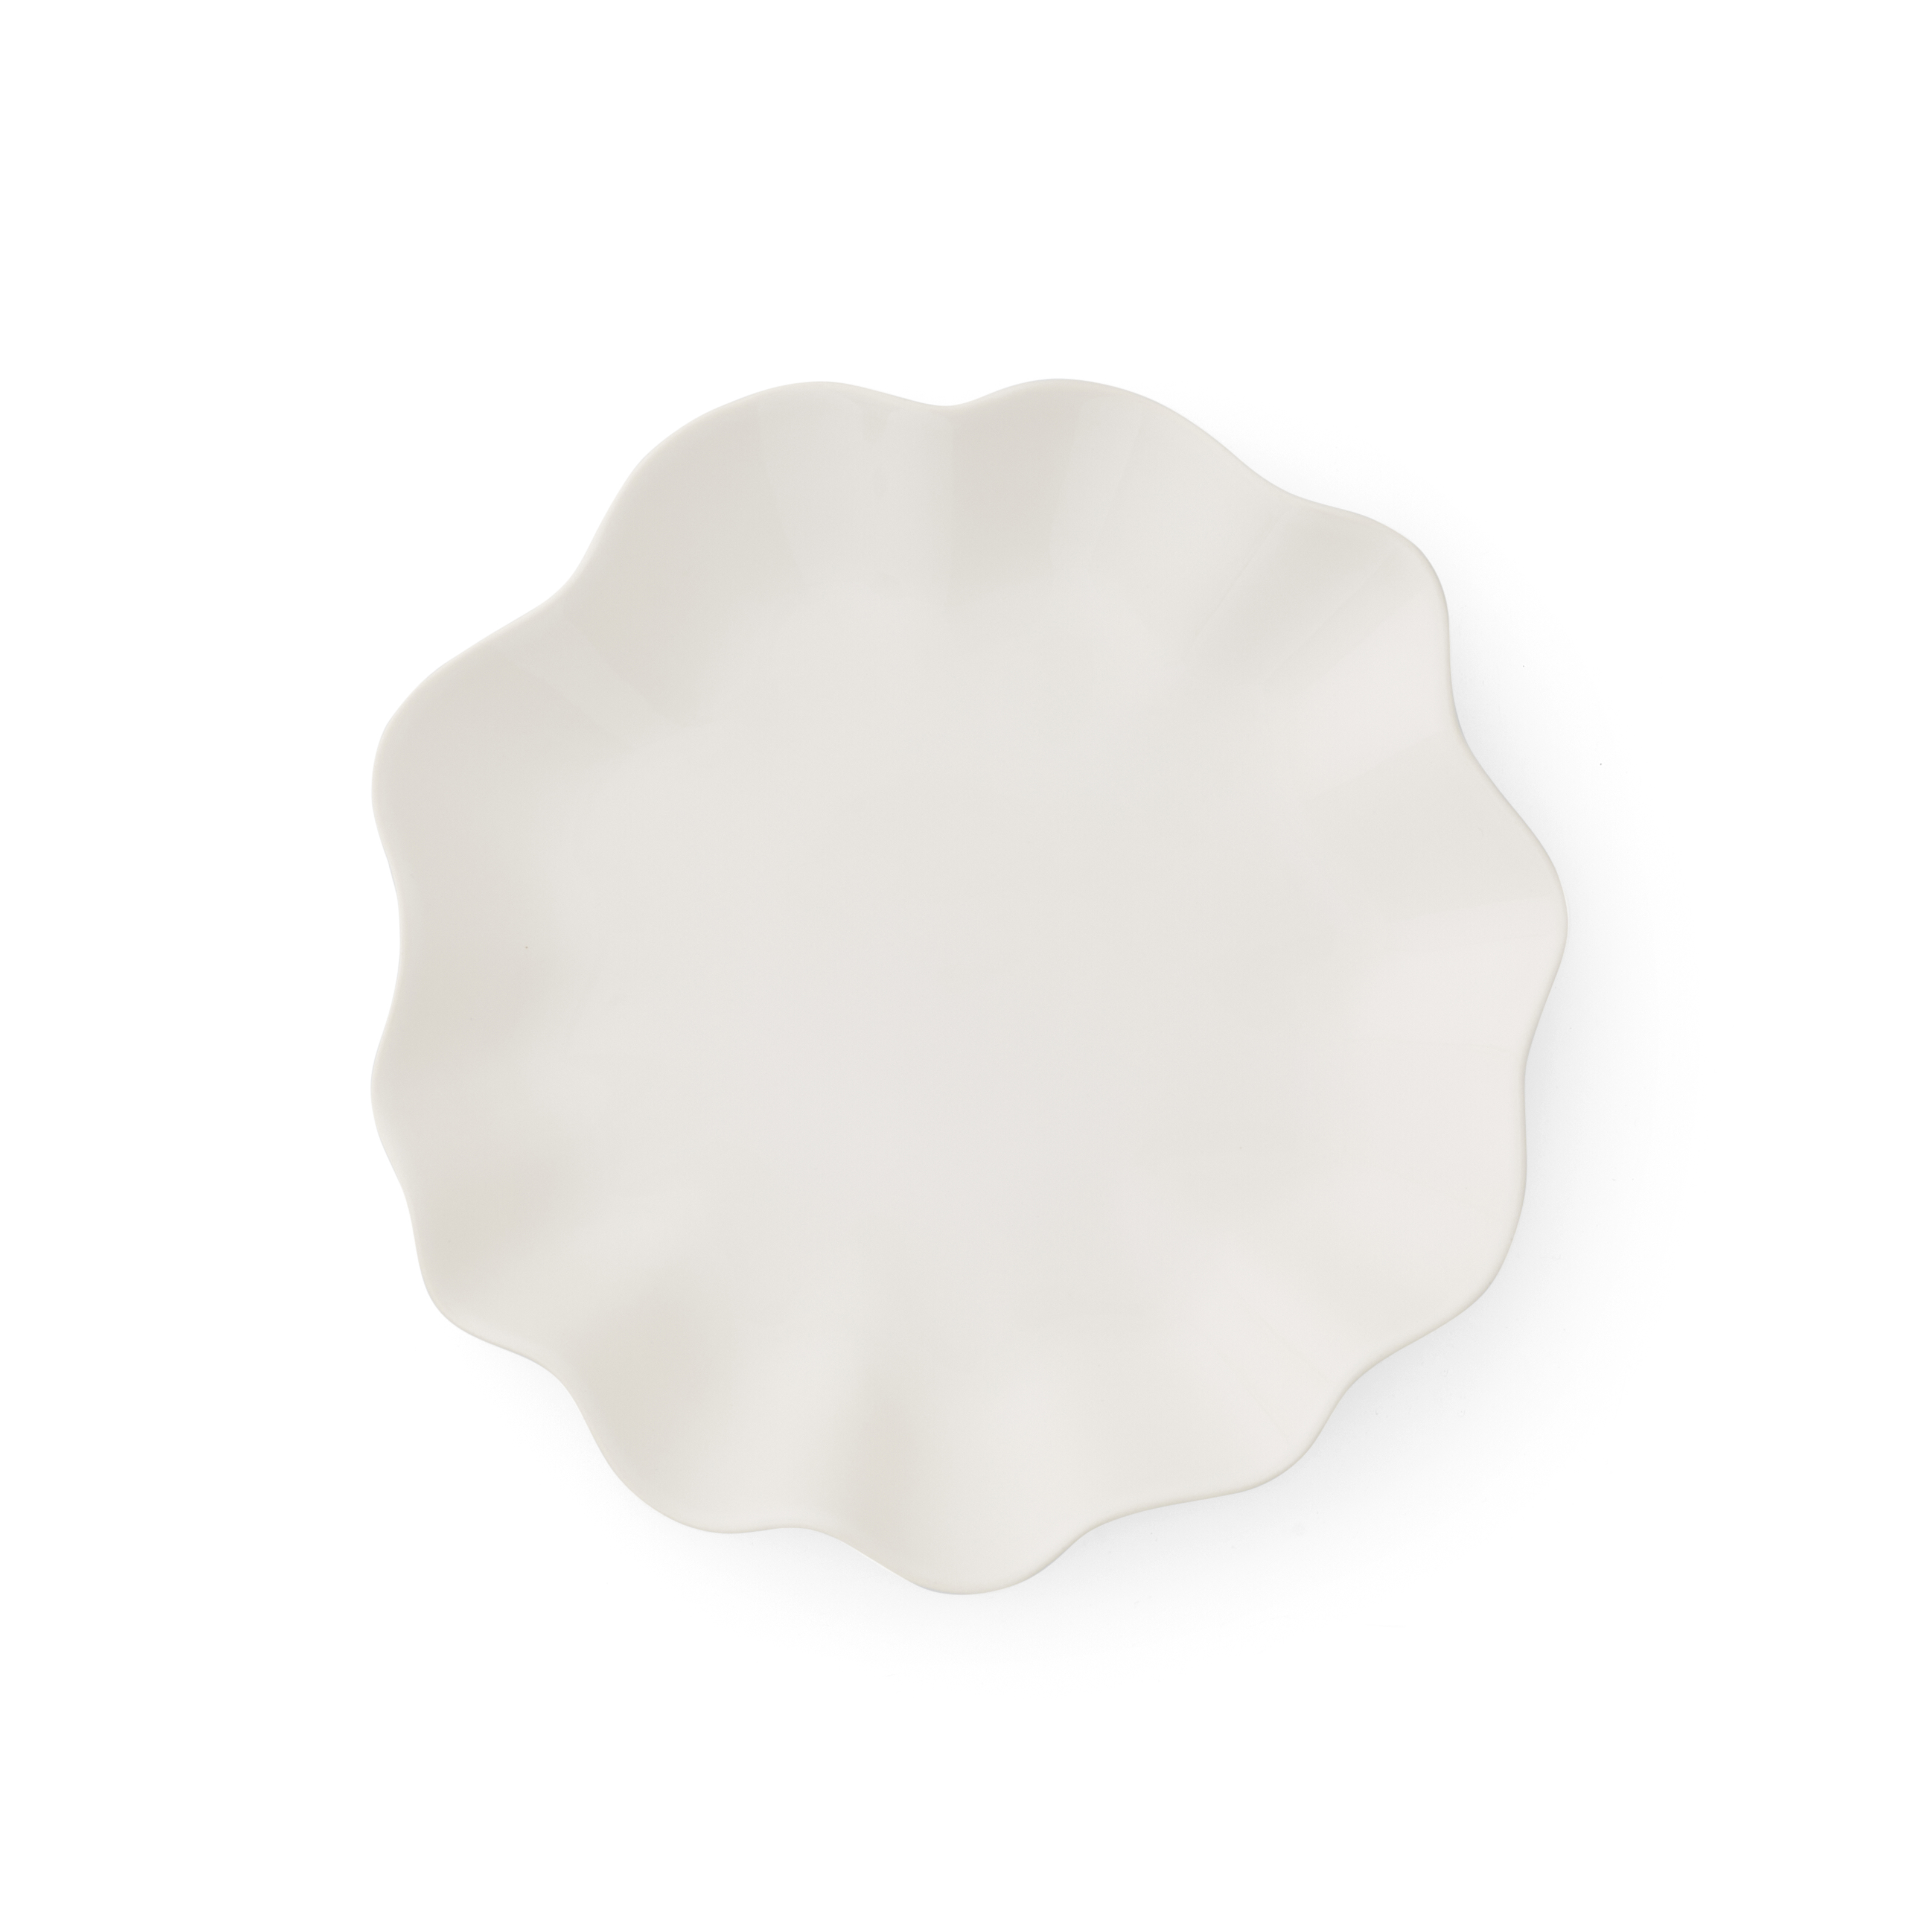 Sophie Conran Floret 11" Dinner Plate- Creamy White image number null